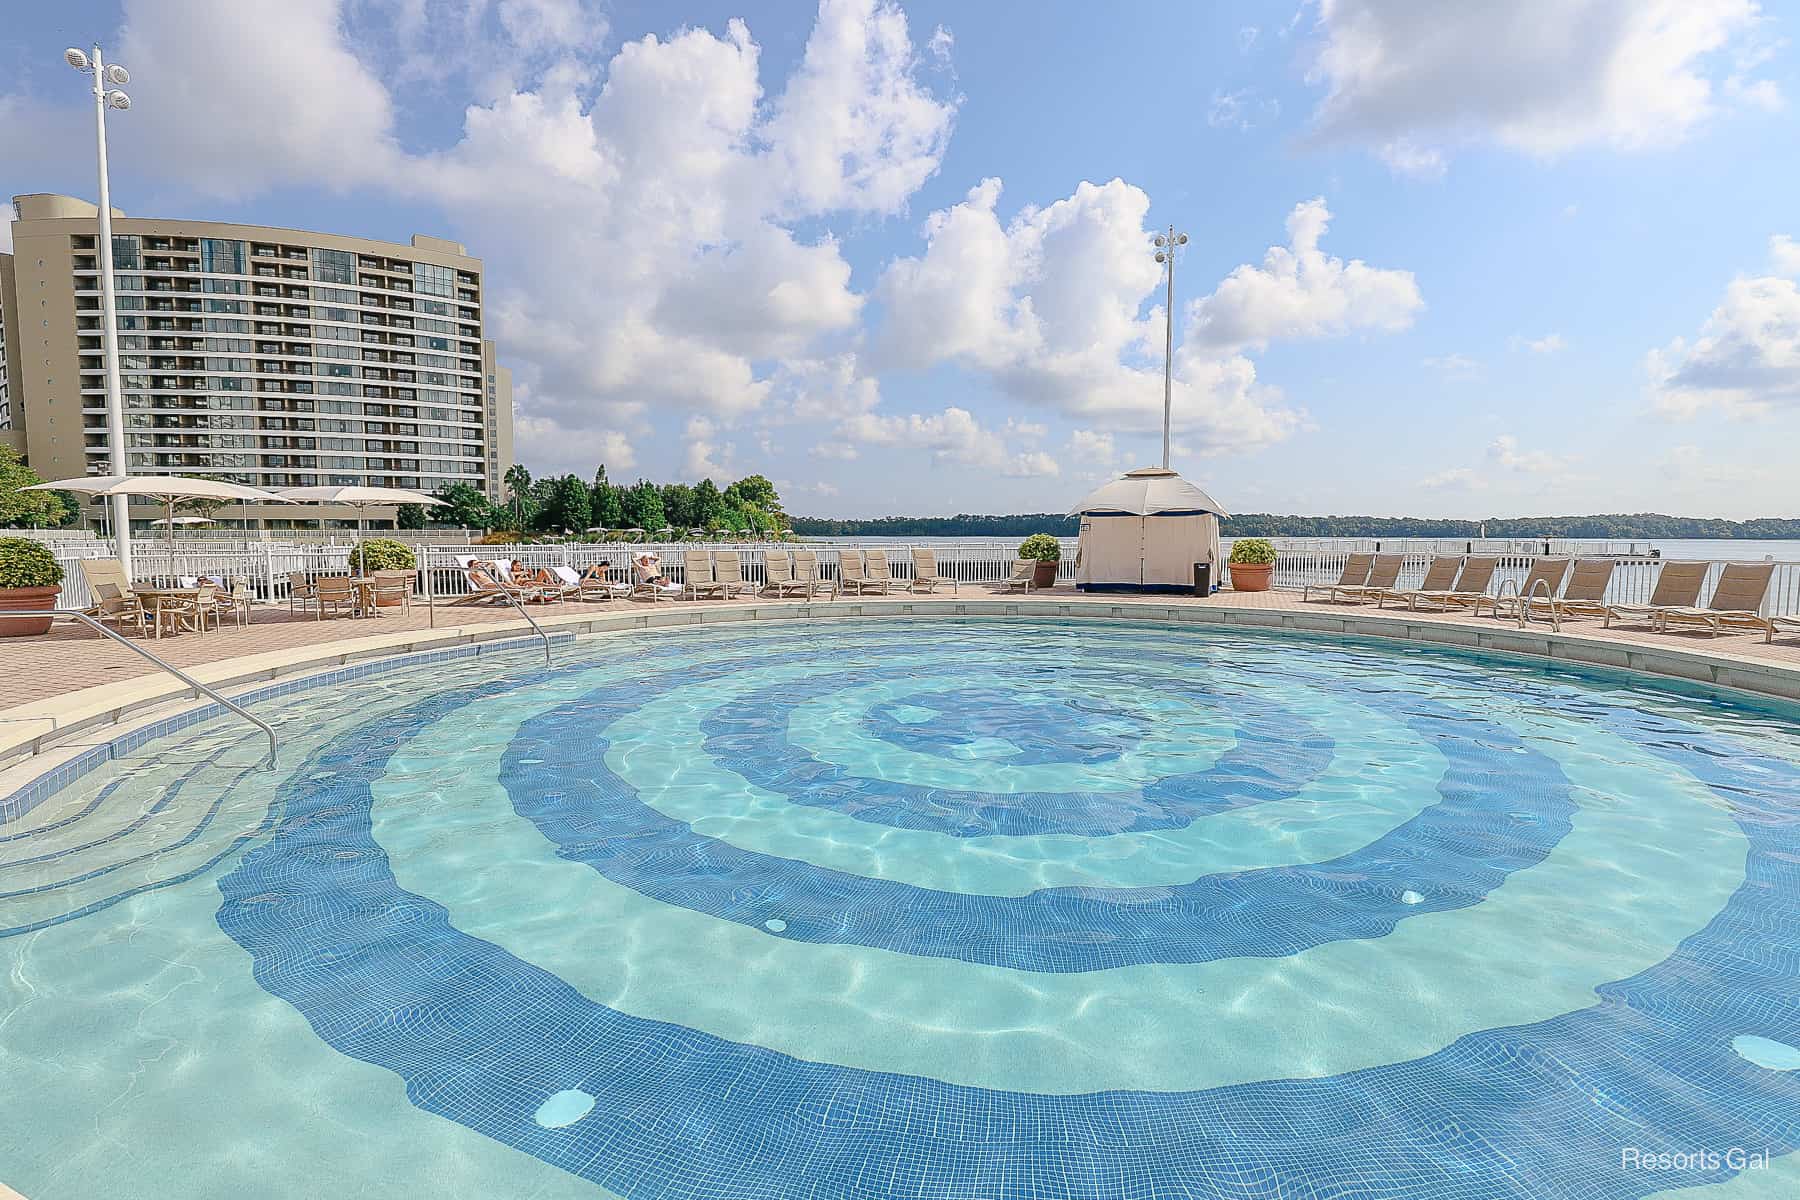 The Resorts Gal Guide to Disney’s Contemporary Resort’s Pools